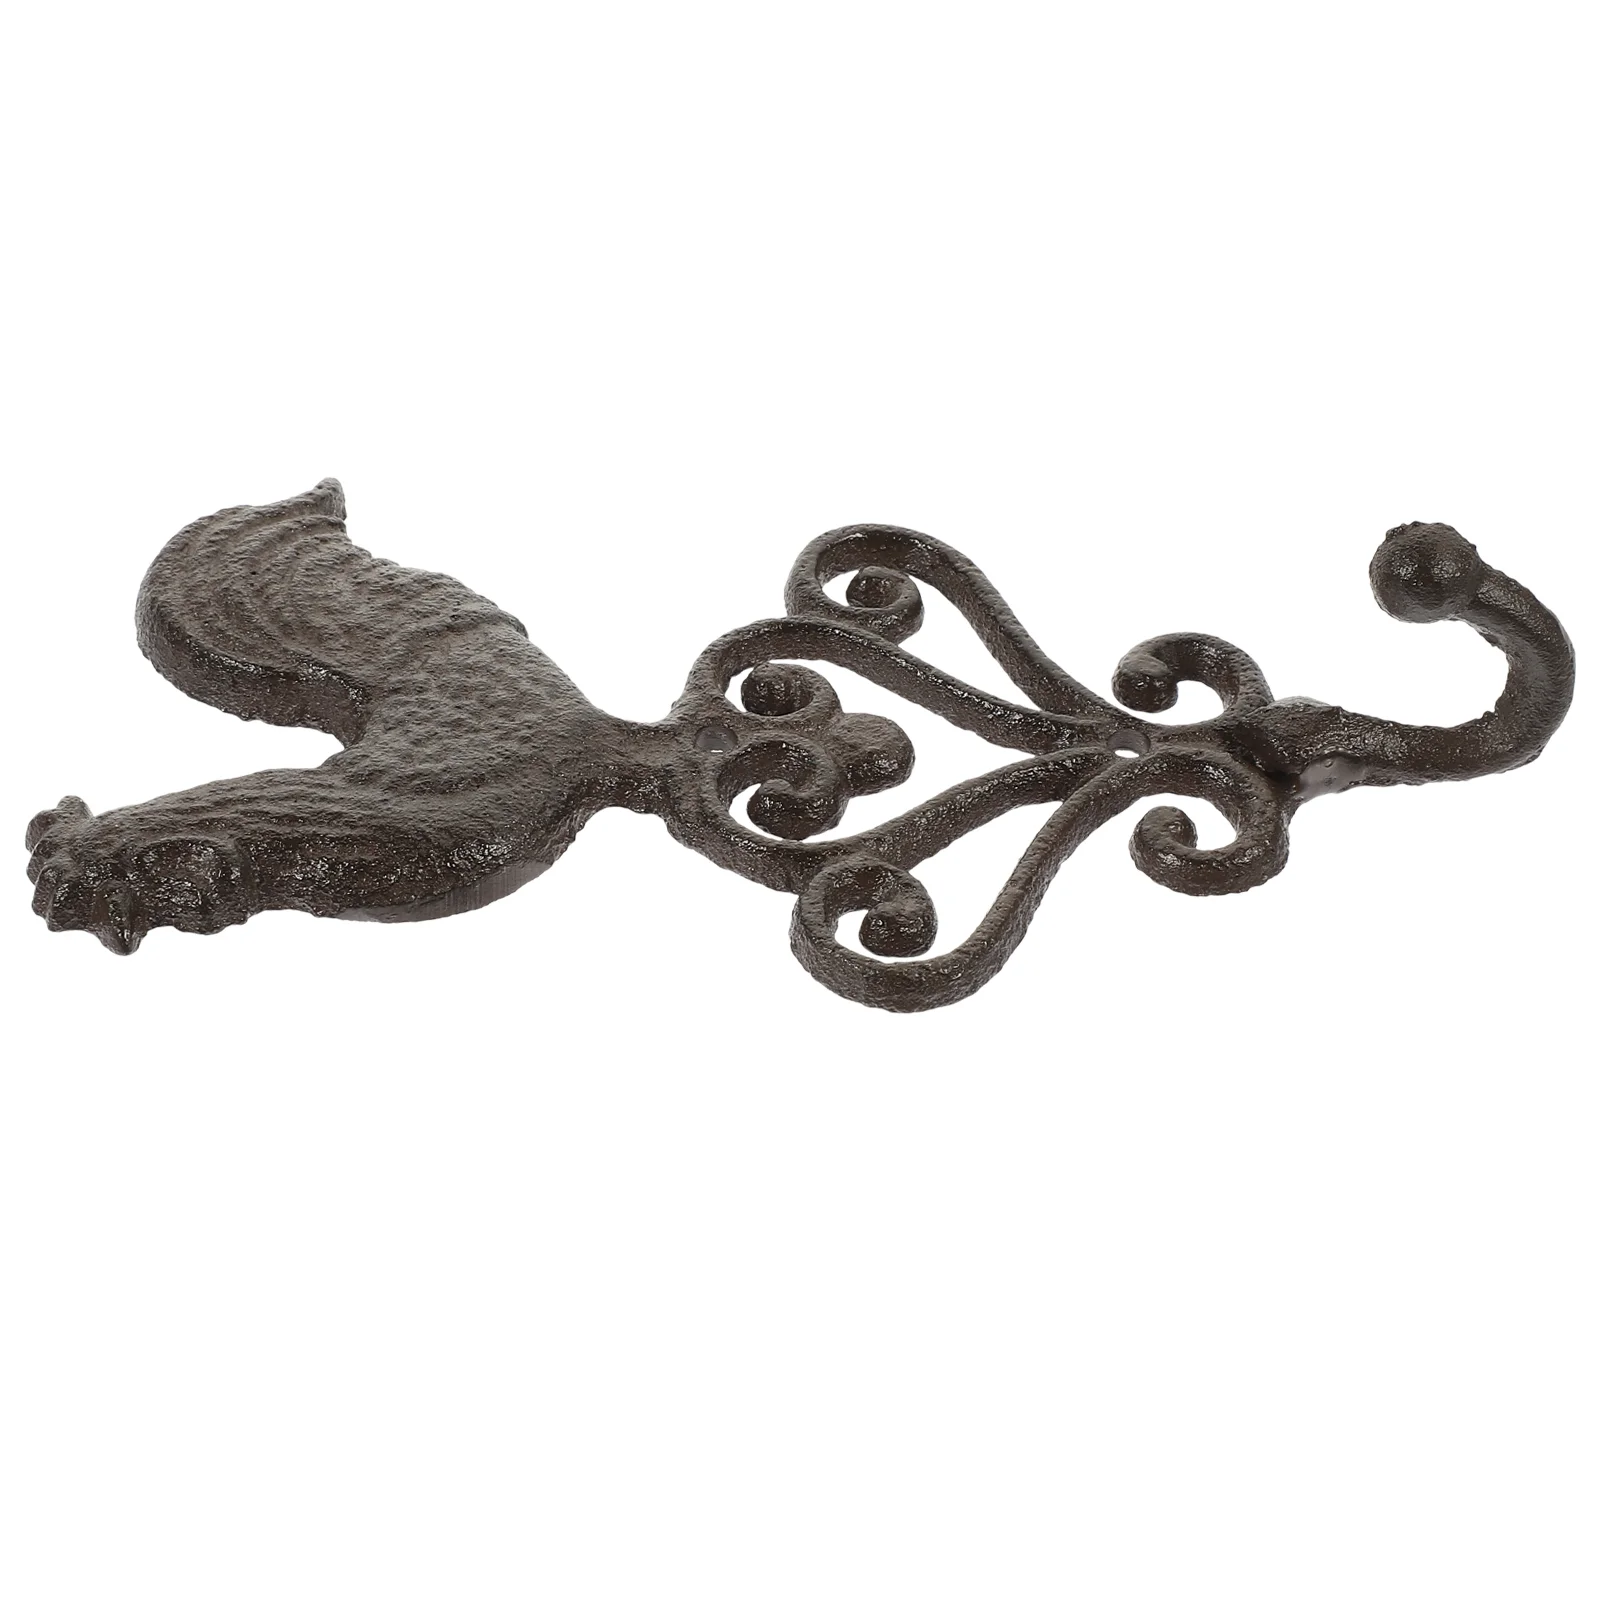 

Hook Wall-mounted Iron Retro Heavy Duty Coat Hangers Rooster Shape Shaped Hanging Office Metal Trim